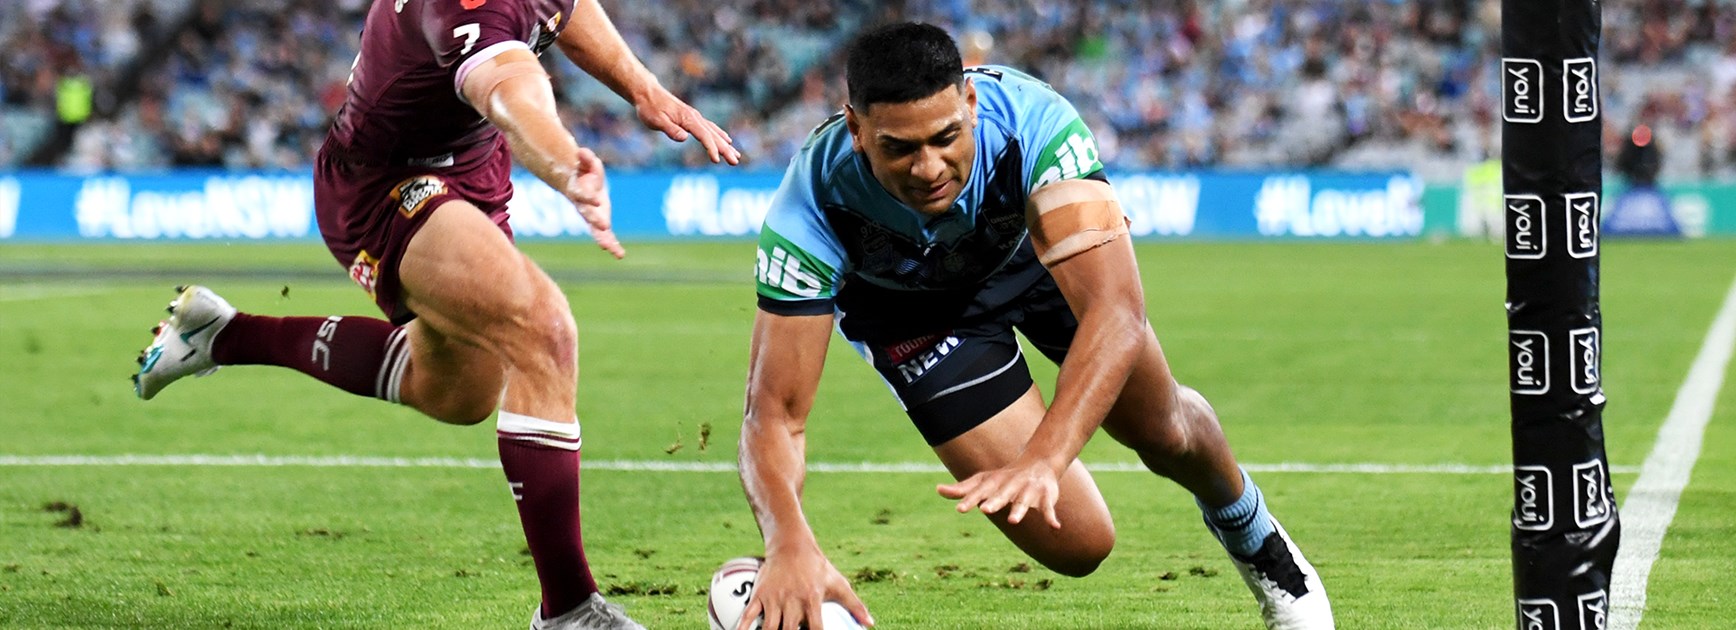 Blue sensation: Cleary shines in Maroons mauling to force decider